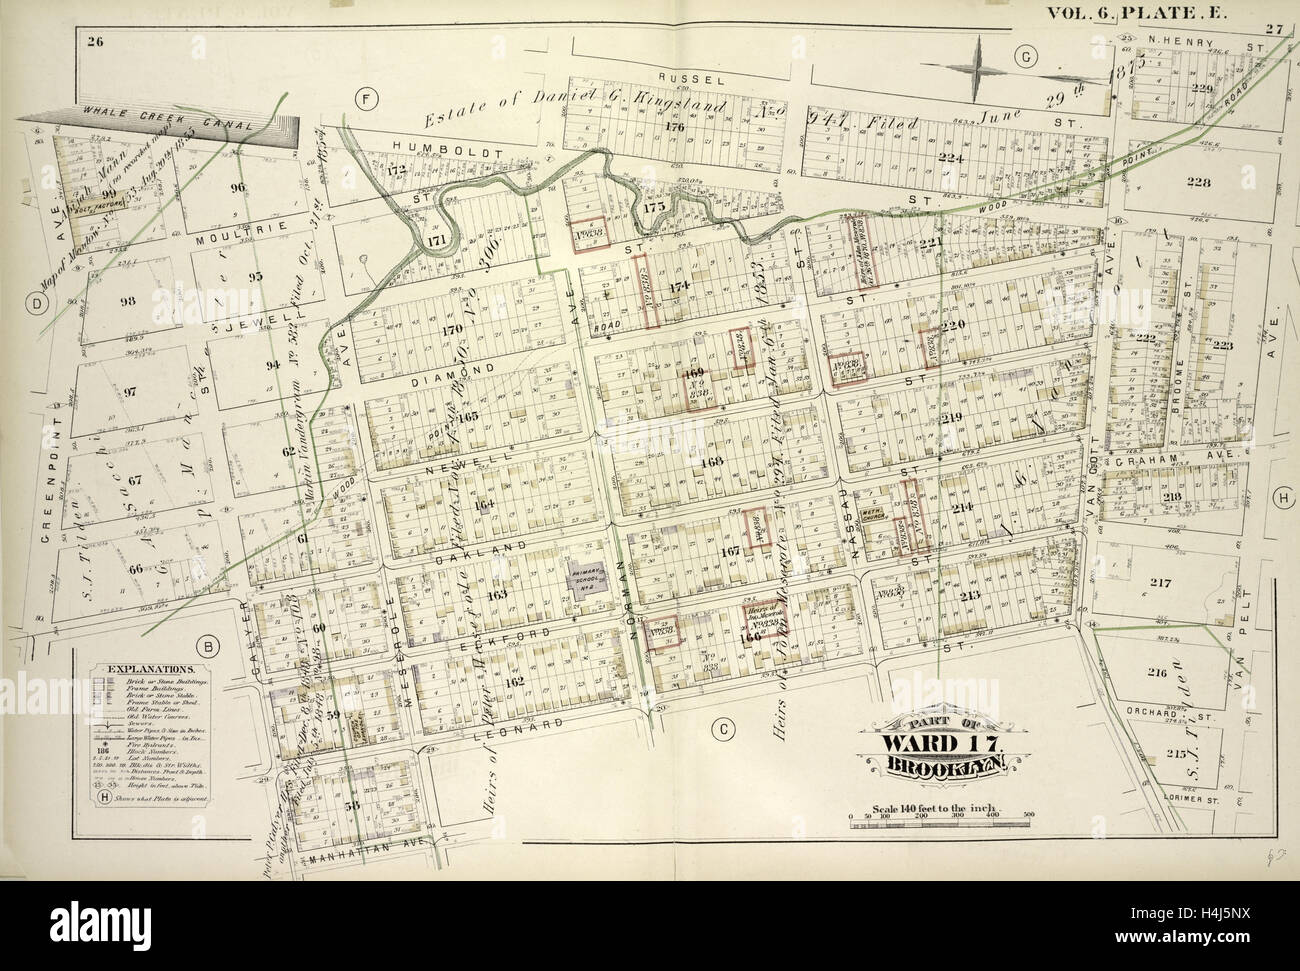 Vol. 6. Plate, E. Map bound by Whale Creek Canal, Humboldt St., Norman Ave., Russell St., Van Cott Ave., N.Henry St. Stock Photo